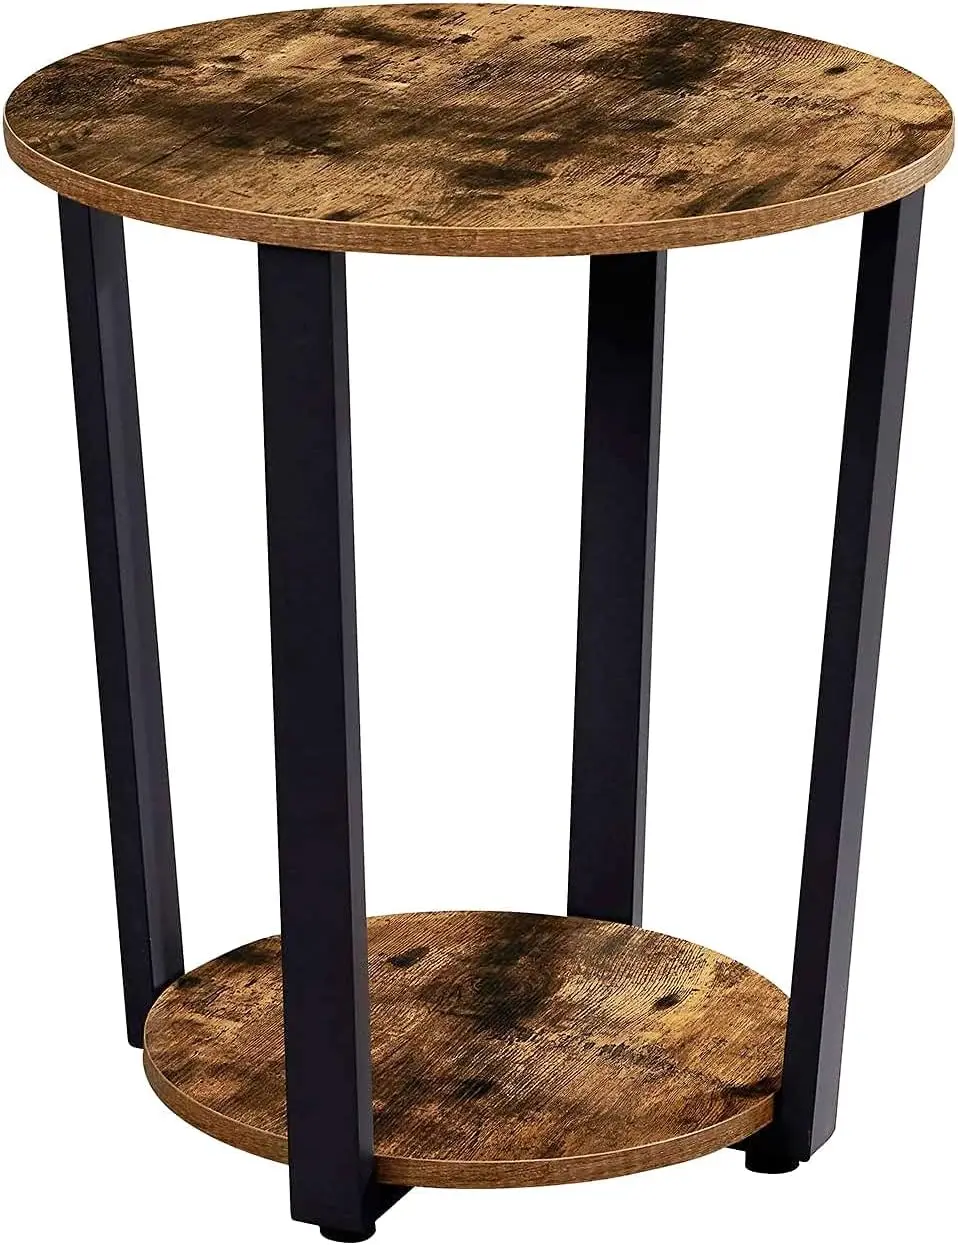 

Wood Round End Table - 19.7" Dia. Side Table with Storage Small Table with Sturdy Metal Frame for Living Room Bedroom Couch Tab